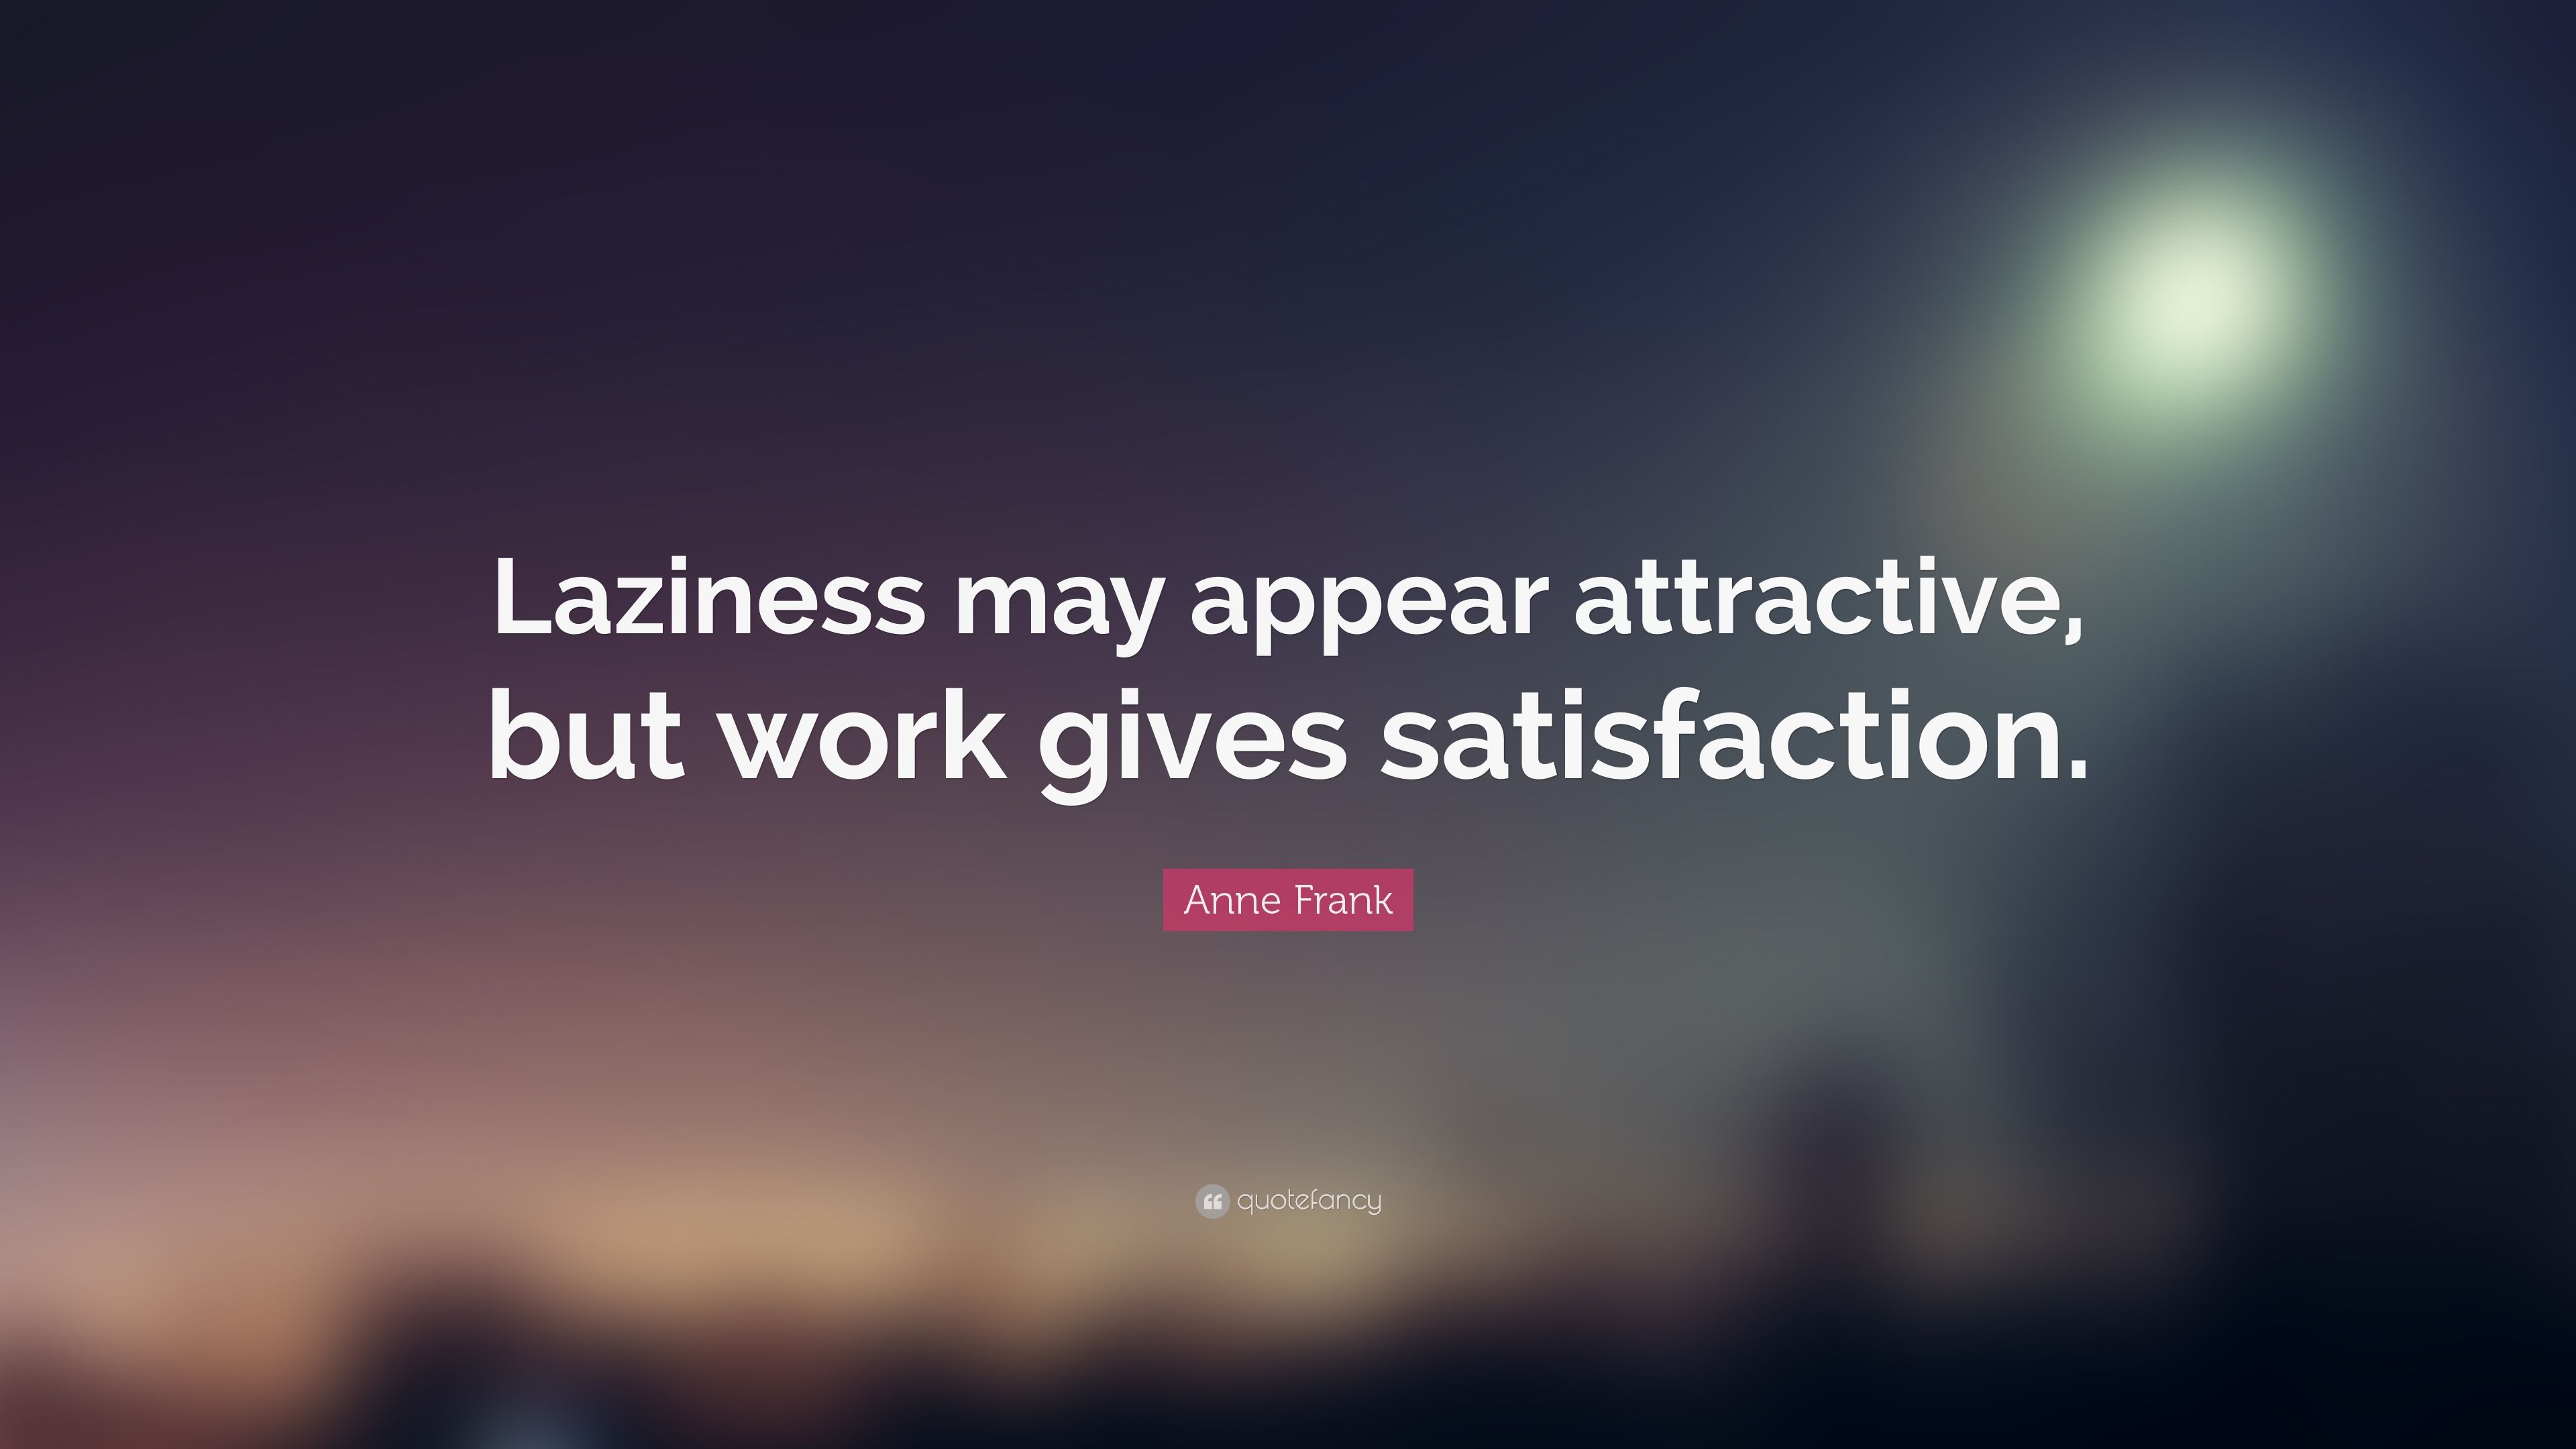 Anne Frank Quote: “Laziness may appear attractive, but work gives satisfaction.” (20 wallpaper)